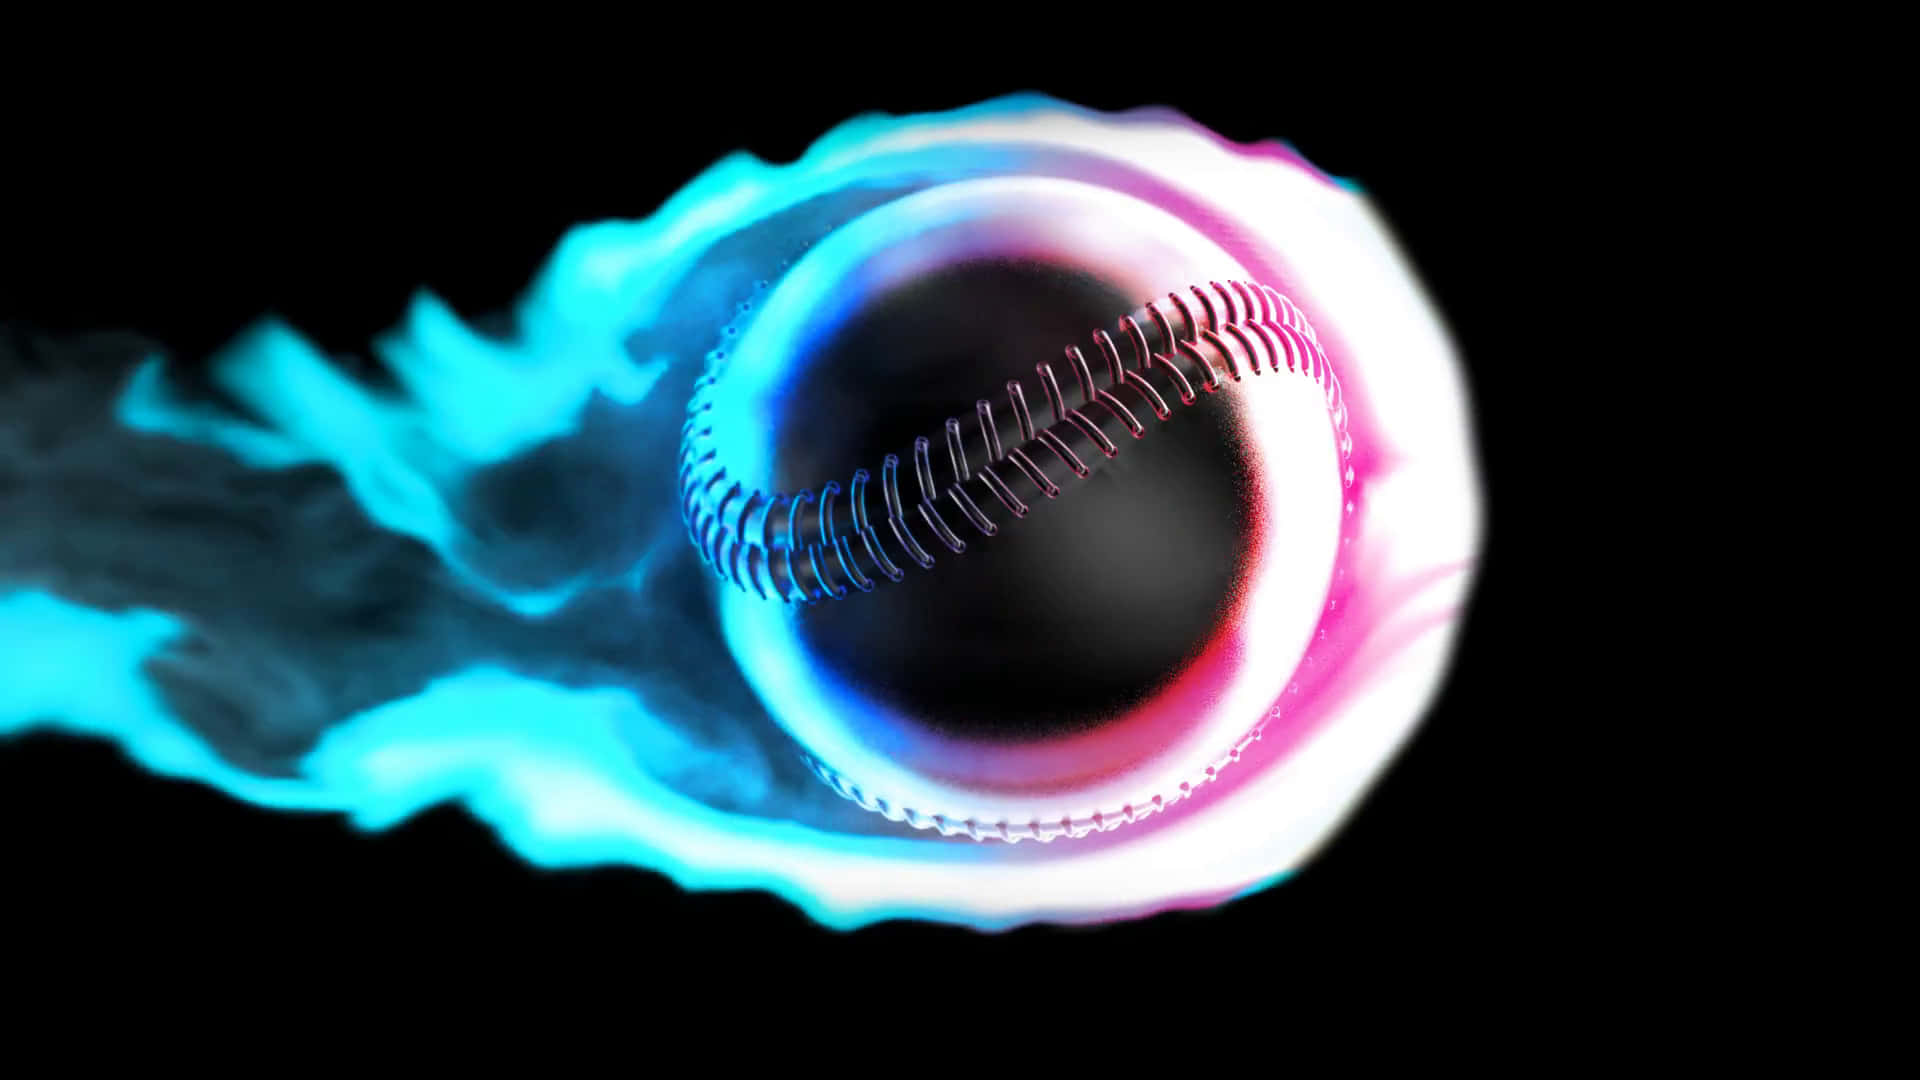 Its Wallpaper Wednesday I hope you enjoy our latest piece wallpaper  wallpaperwednesday baseball   Baseball wallpaper Mlb wallpaper  Baseball backgrounds